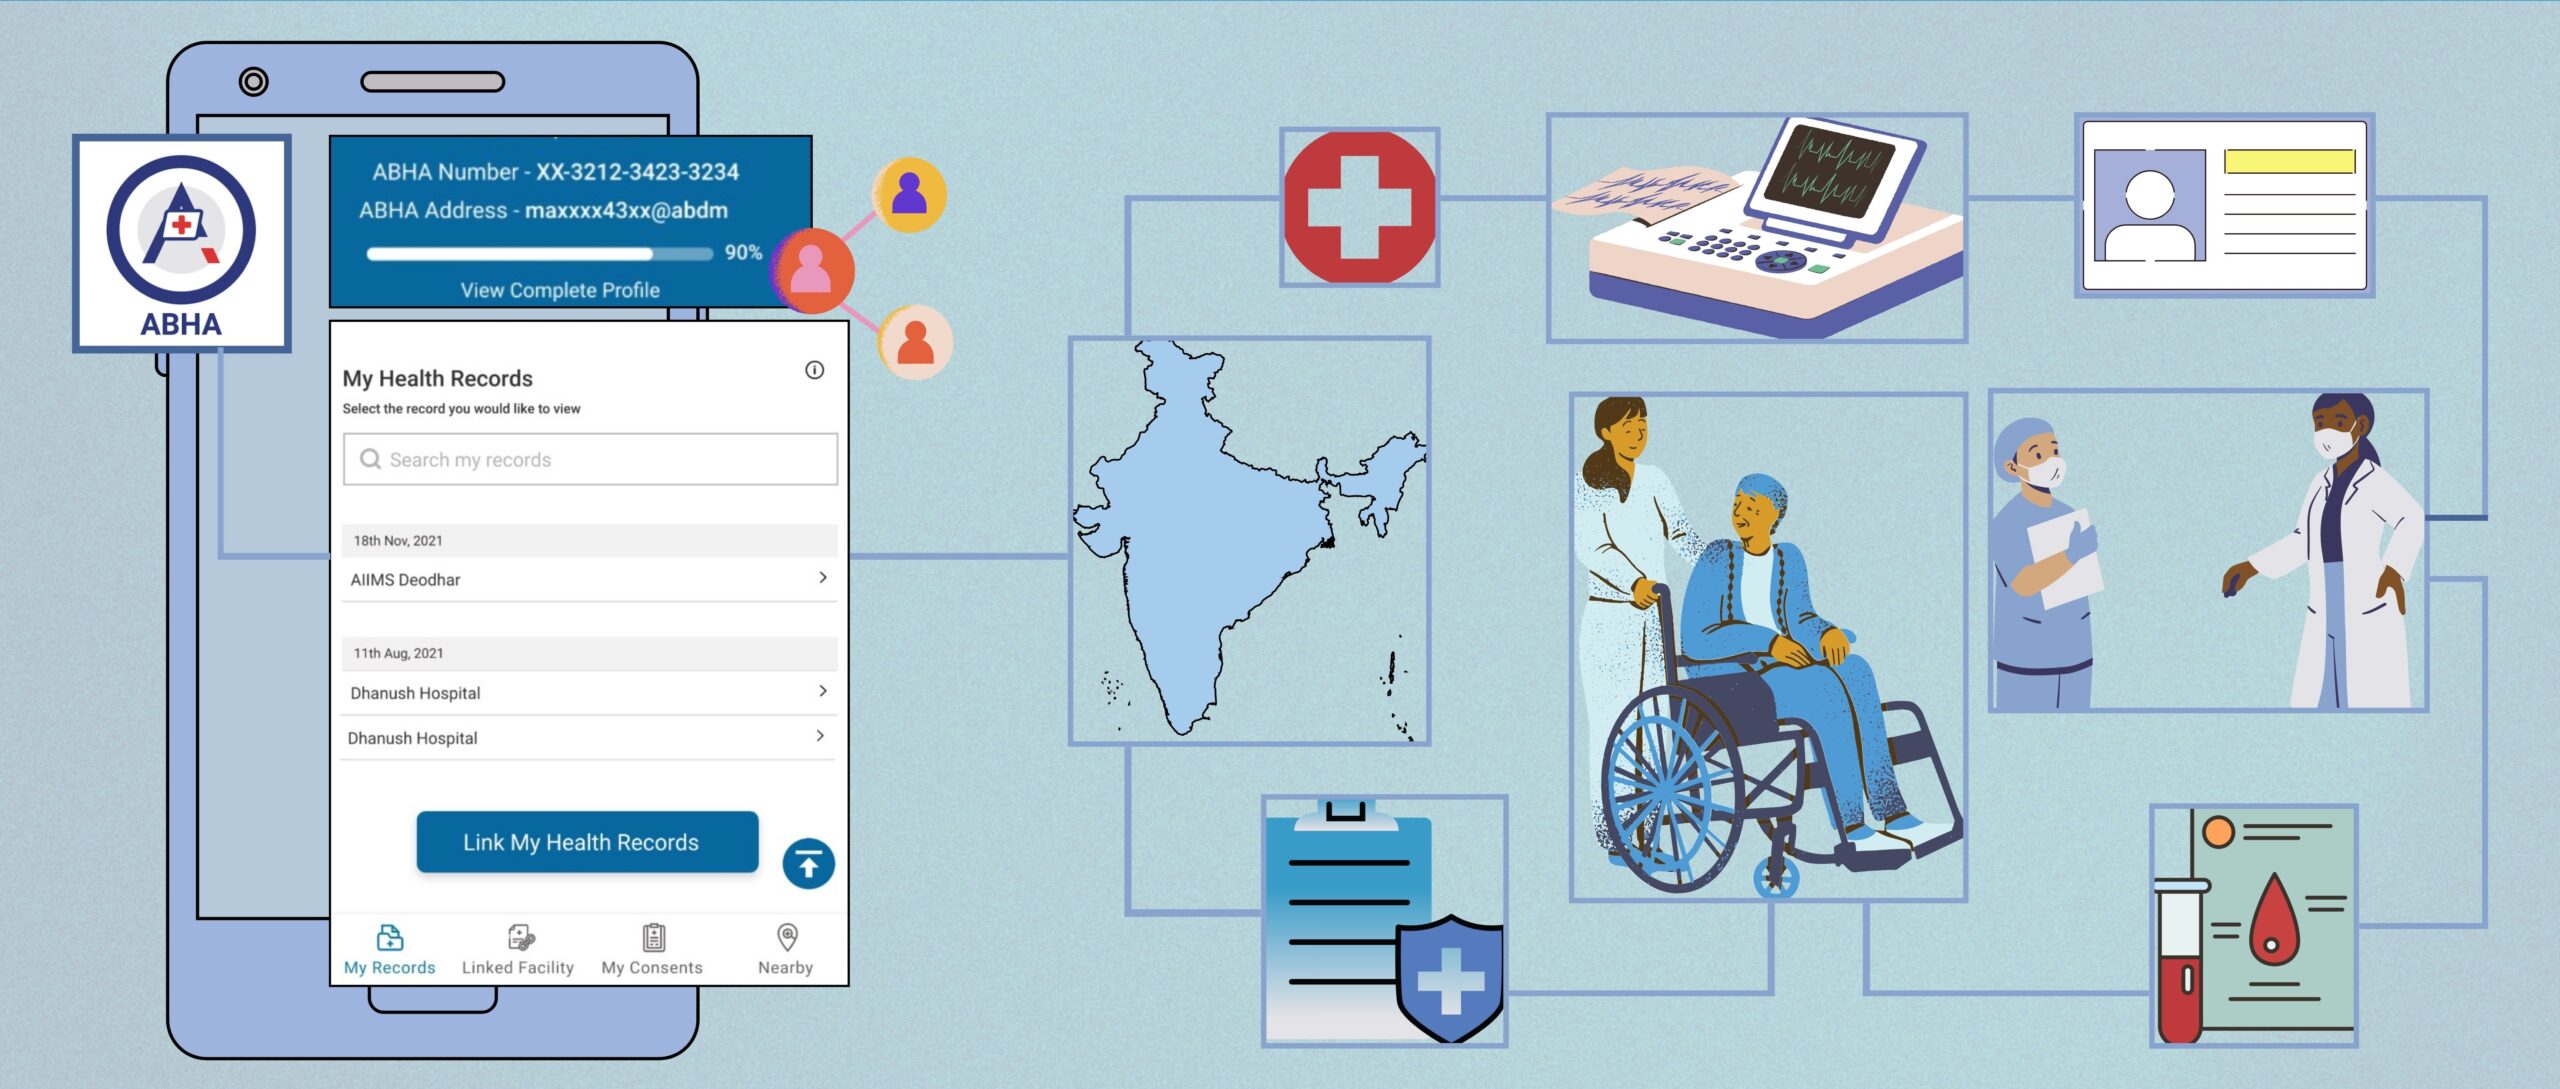 ABHA Accounts: India’s Interoperable and Portable Health Data Management System